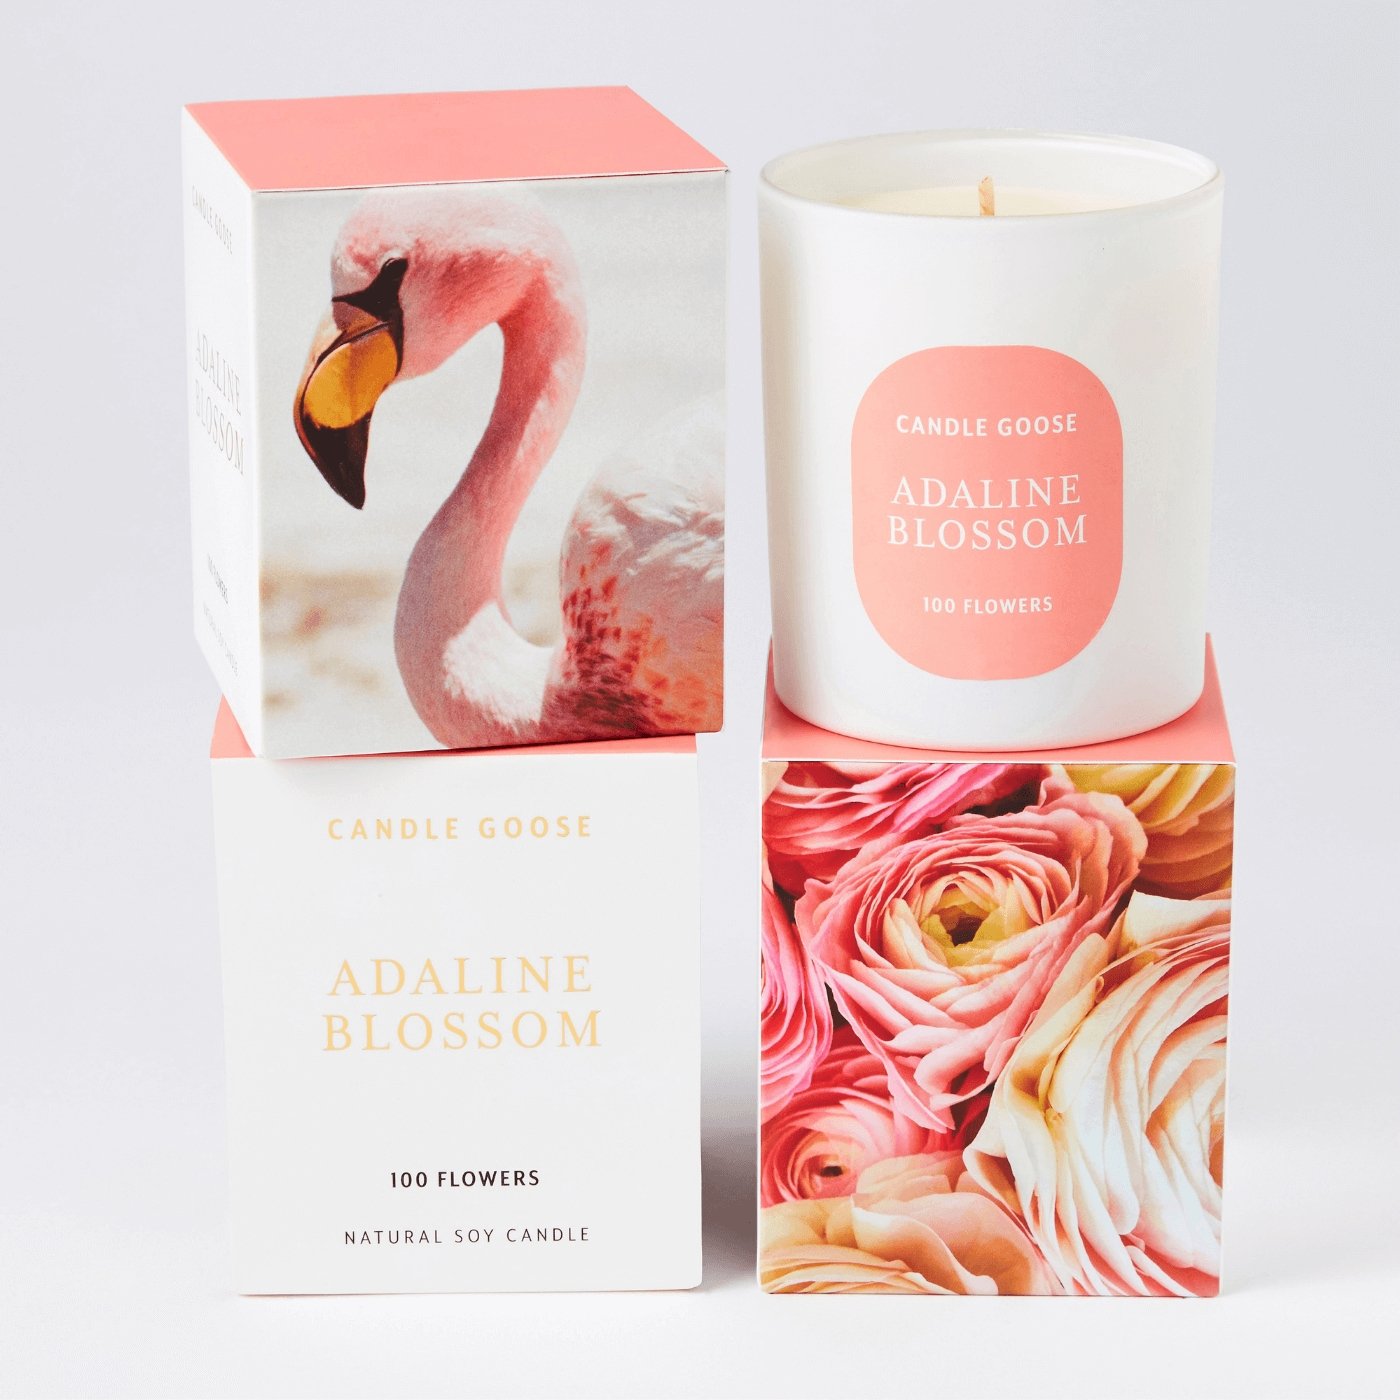 Adaline Blossom Hand Poured Soy Wax Candle - 300g - The Mountain Merchant